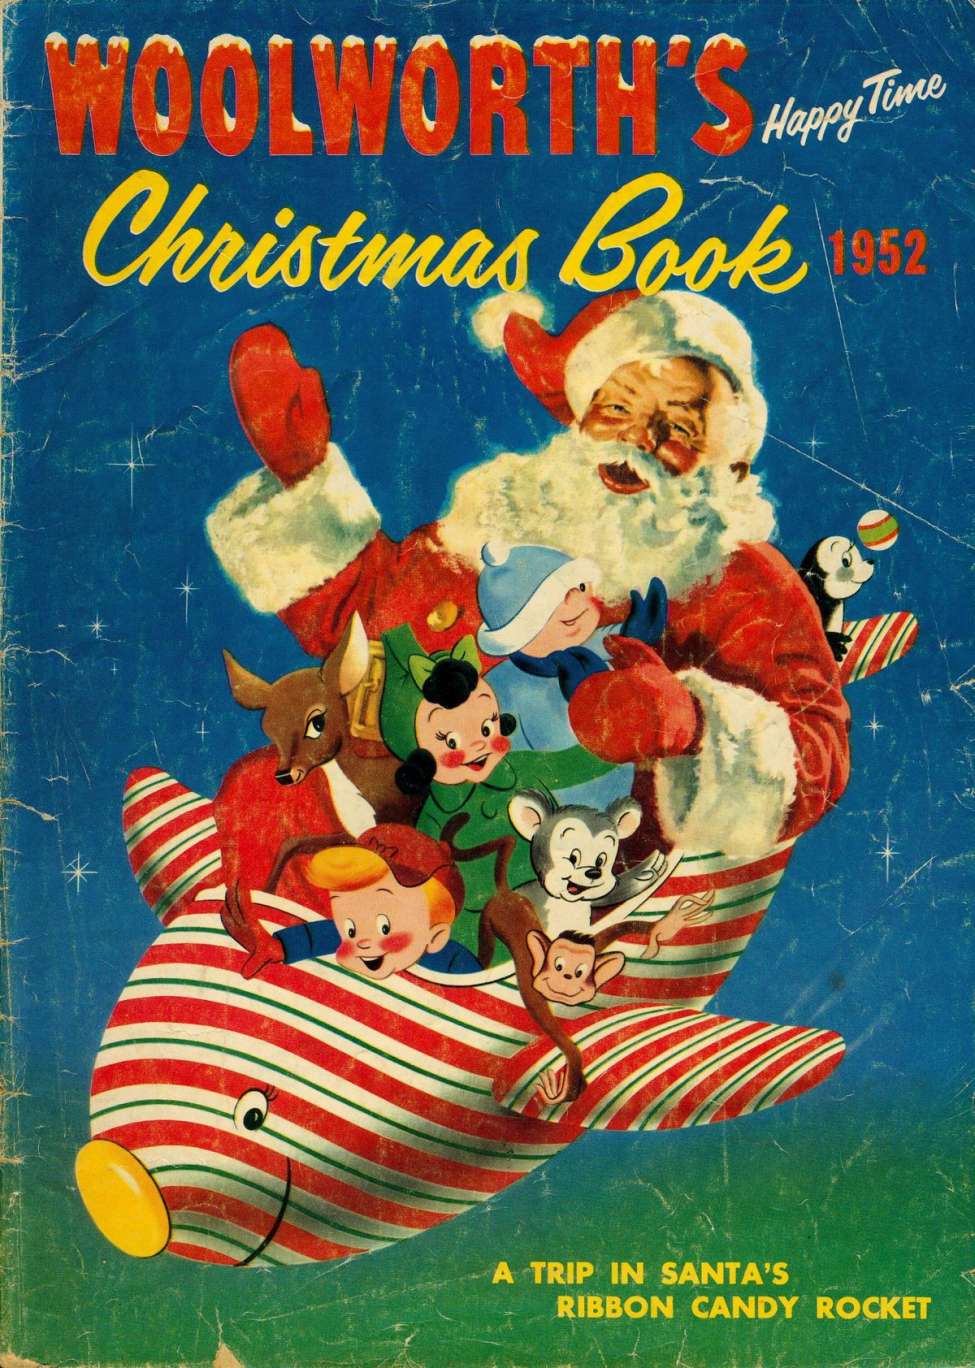 Book Cover For Woolworth's Happy Time Christmas Book 1952 - Version 2